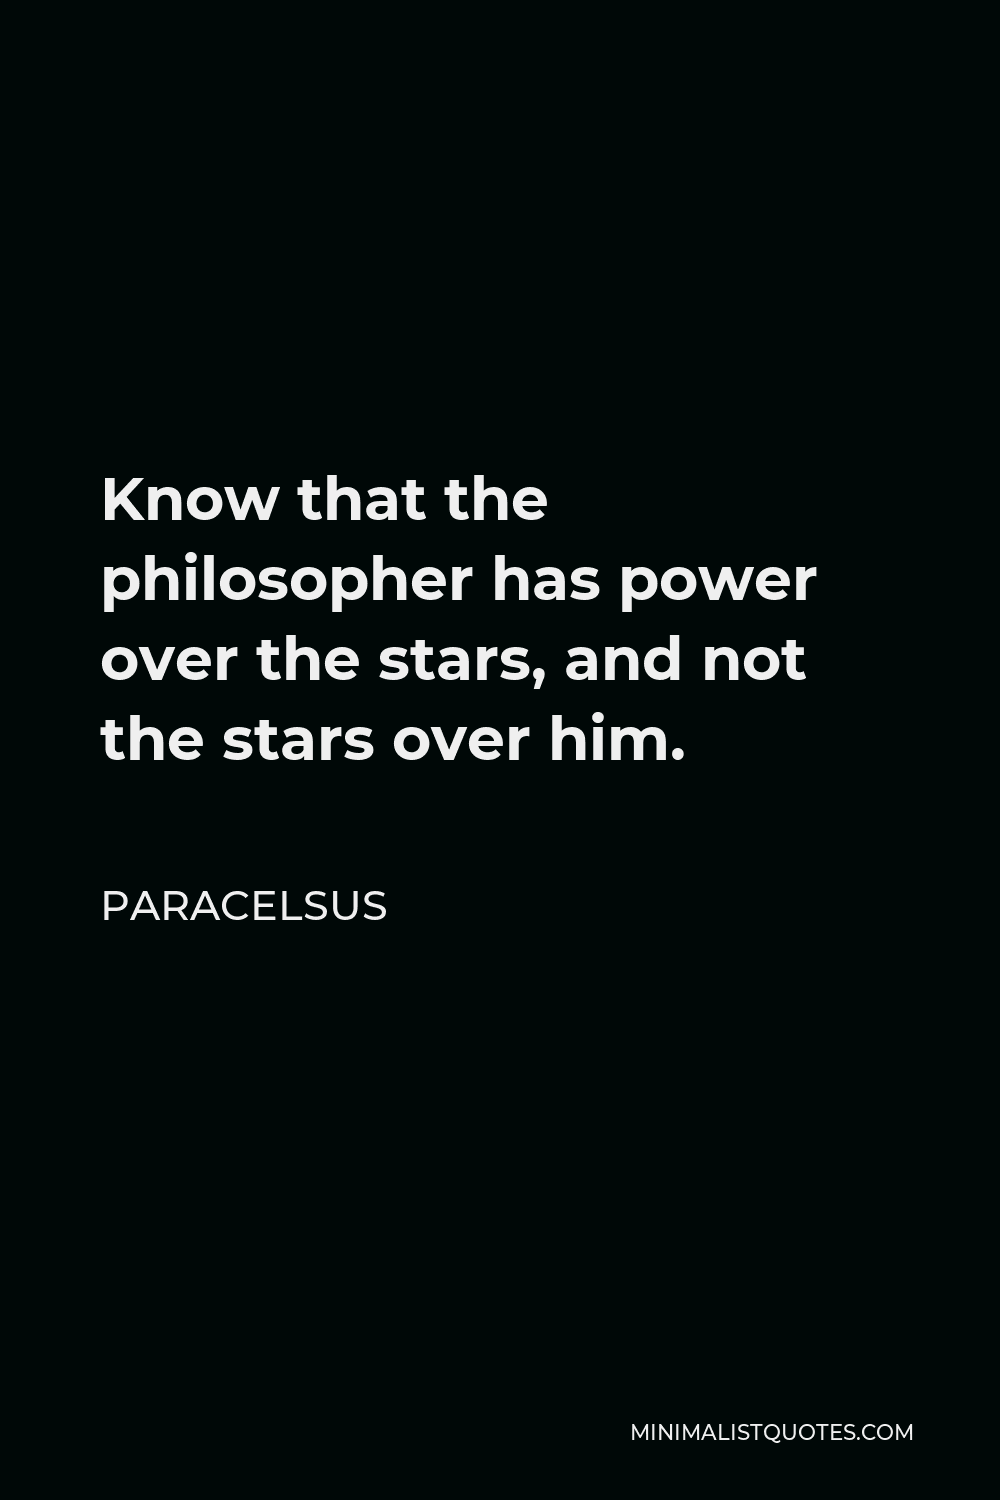 Paracelsus Quote - Know that the philosopher has power over the stars, and not the stars over him.